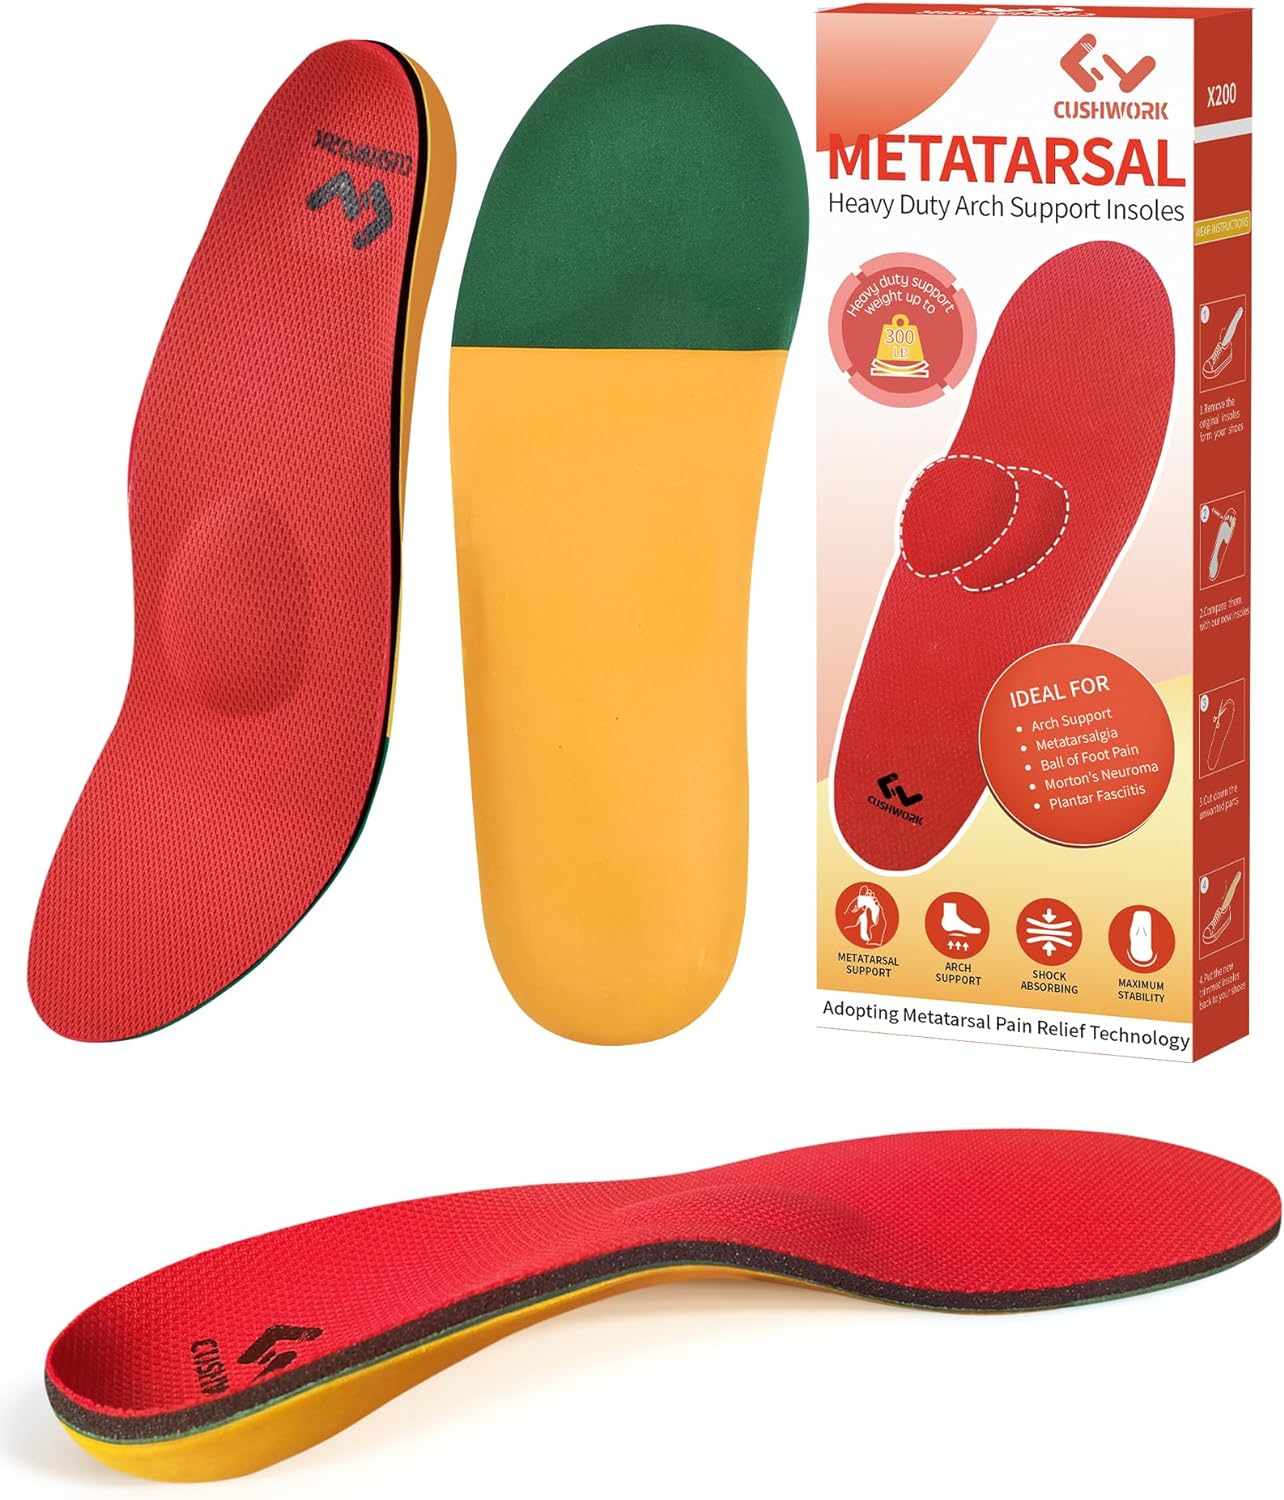 Metatarsalgia Insoles for Ball of Foot Pain,Mortons Neuroma,Heavy Duty Arch Supports Insoles,Orthotic Insoles,Men Women Shoe Insert for Metatarsal,Foot Pain Relief-C